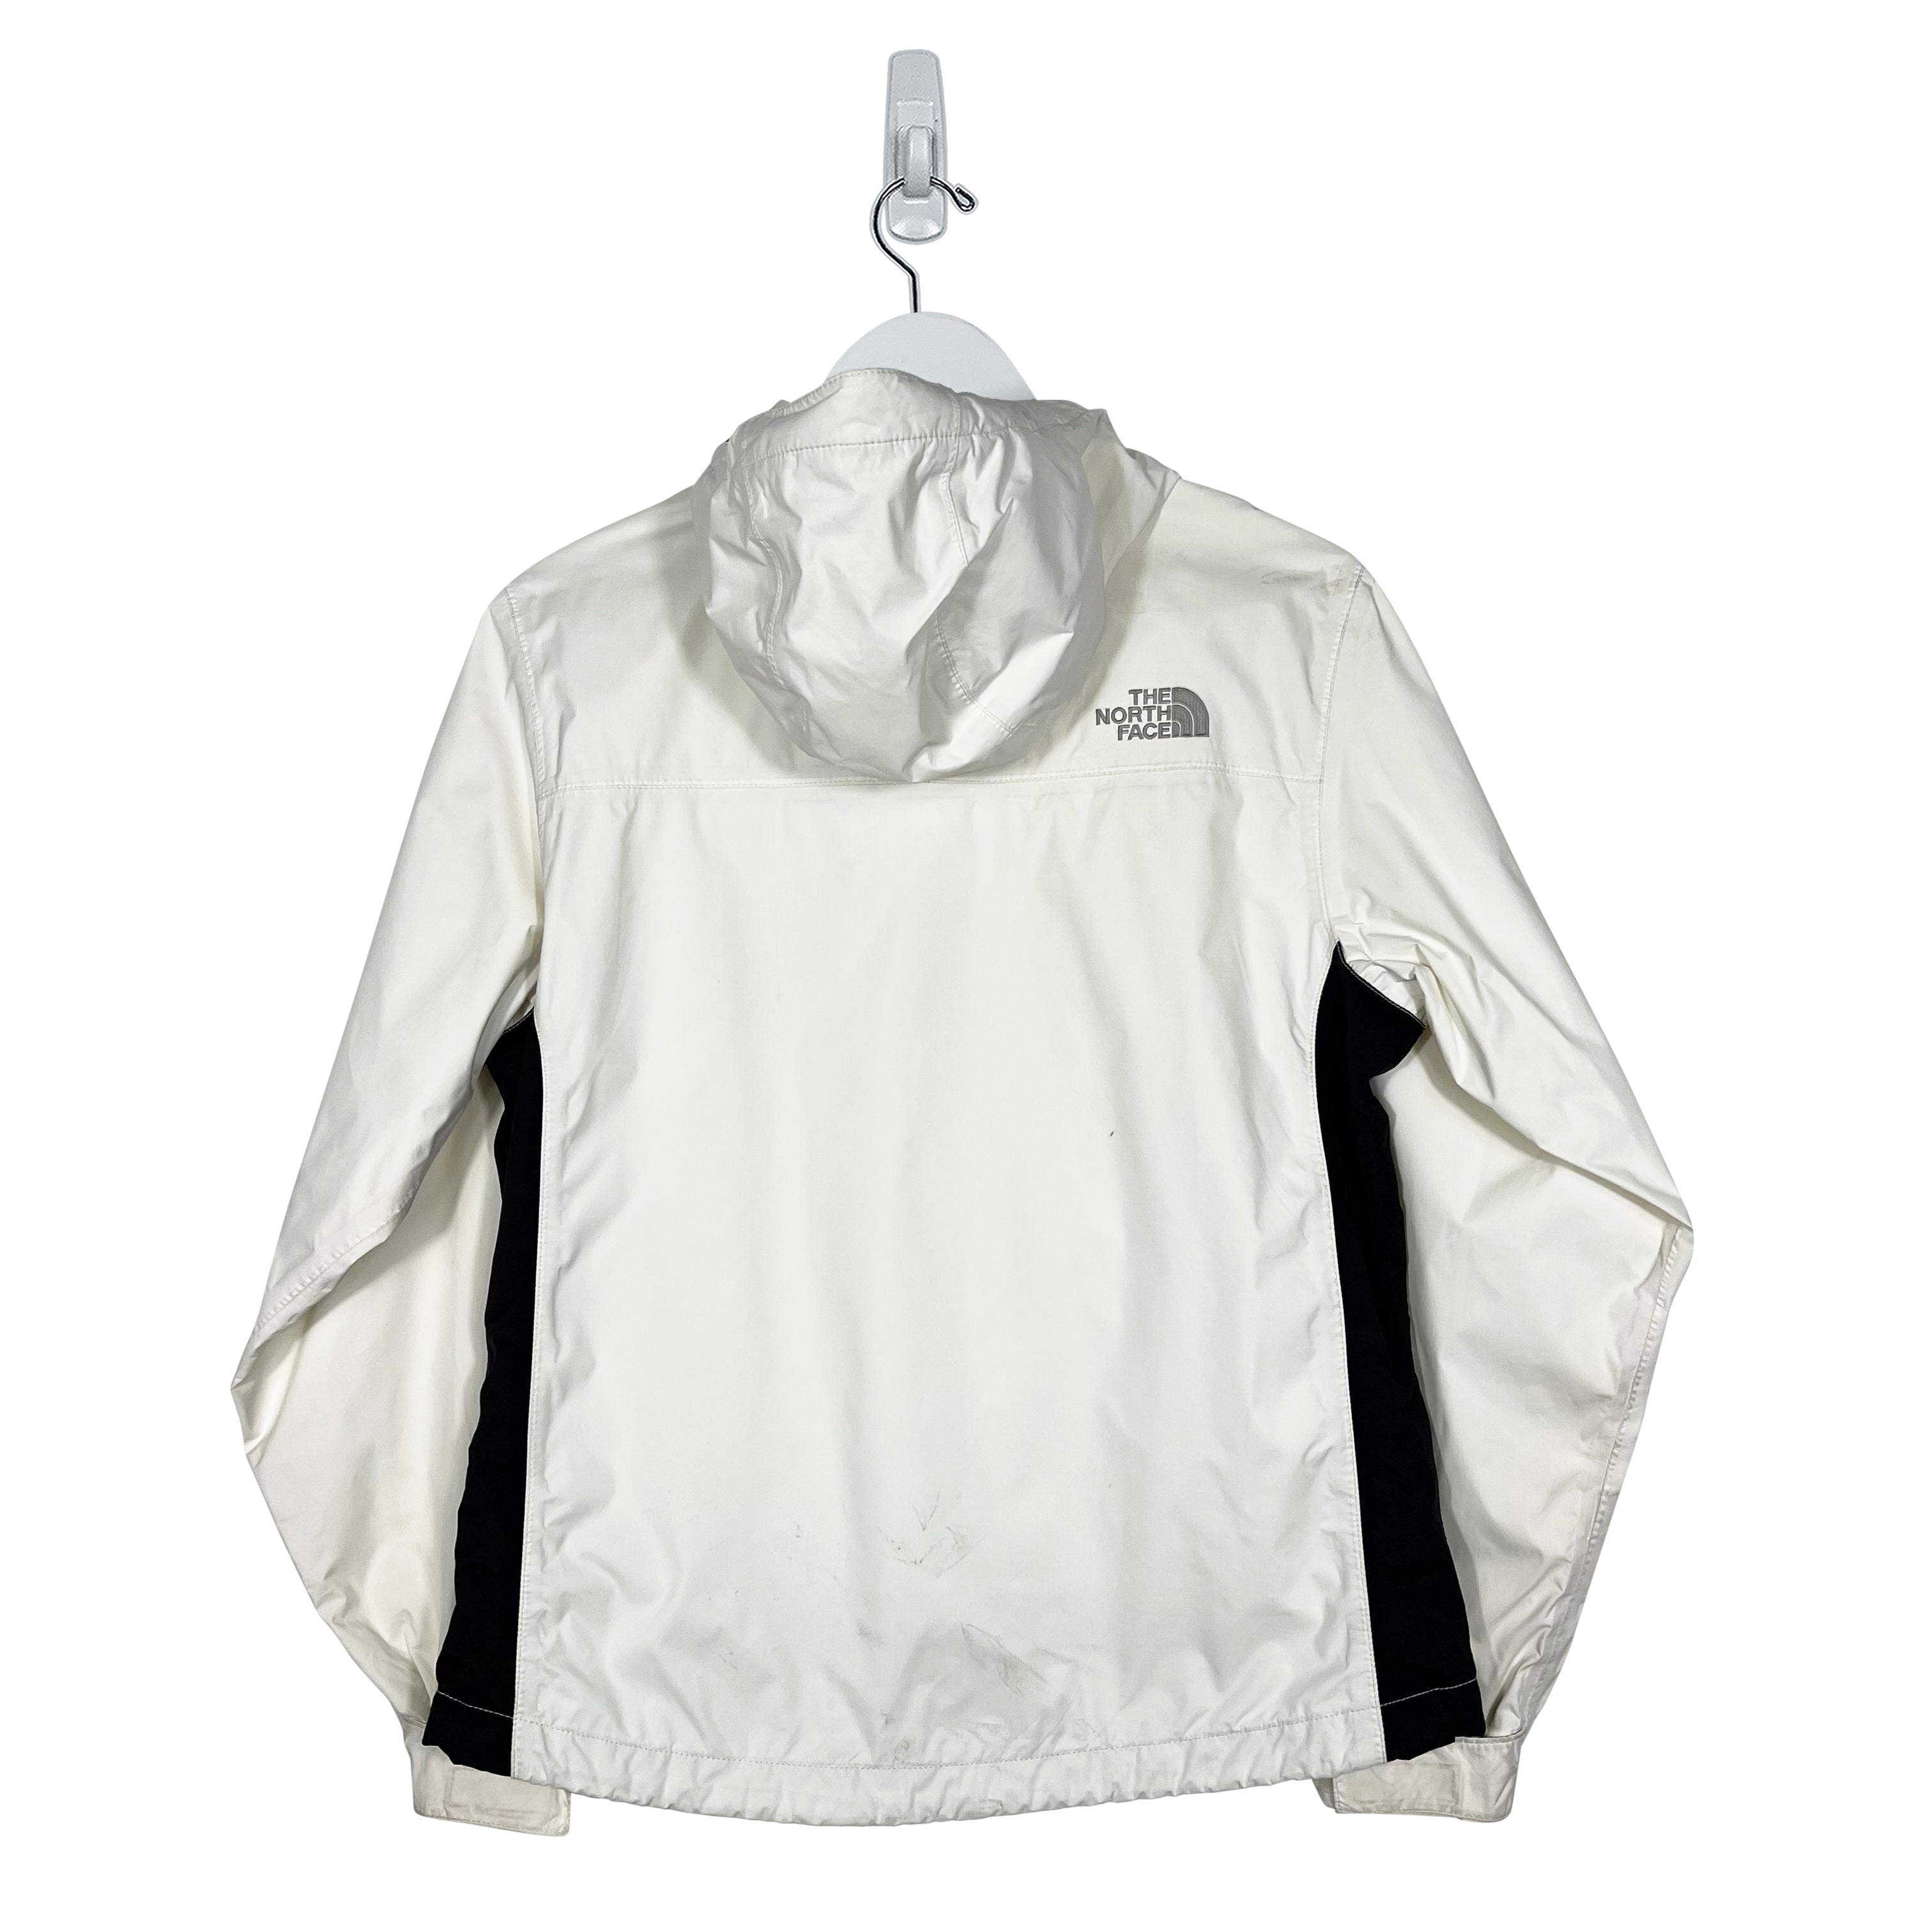 The North Face Lightweight Jacket - Women's XS